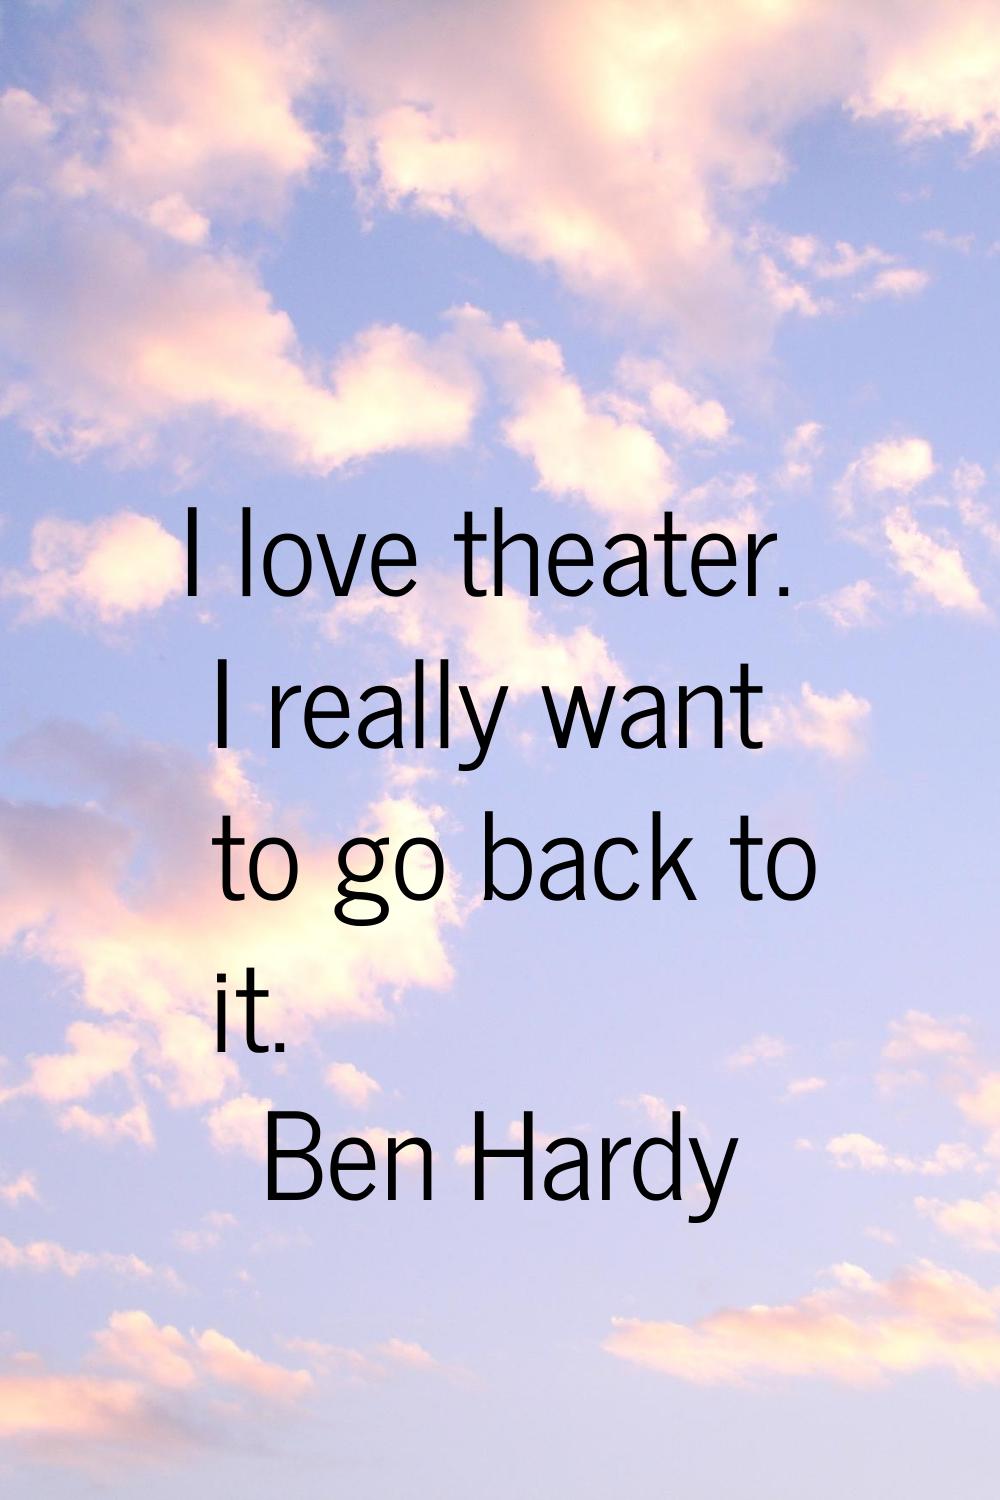 I love theater. I really want to go back to it.